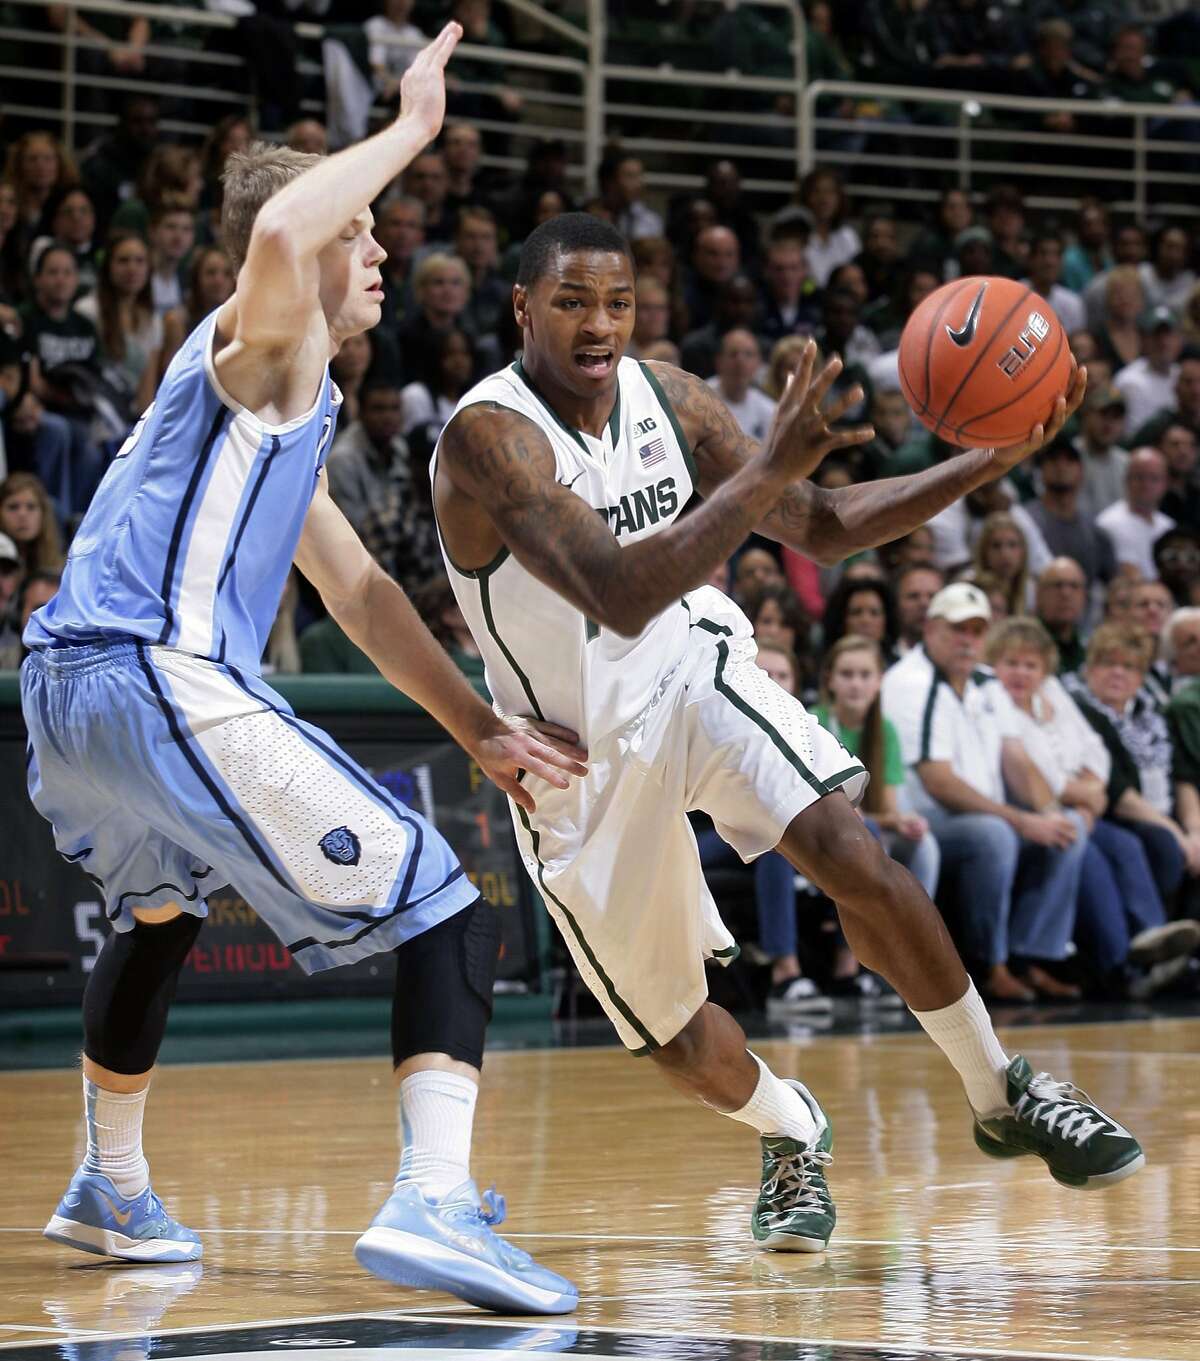 Michigan State's Keith Appling, right, drives against Columbia's Grant Mullins during the first half of an NCAA college basketball game Friday, Nov. 15, 2013, in East Lansing, Mich. (AP Photo/Al Goldis)